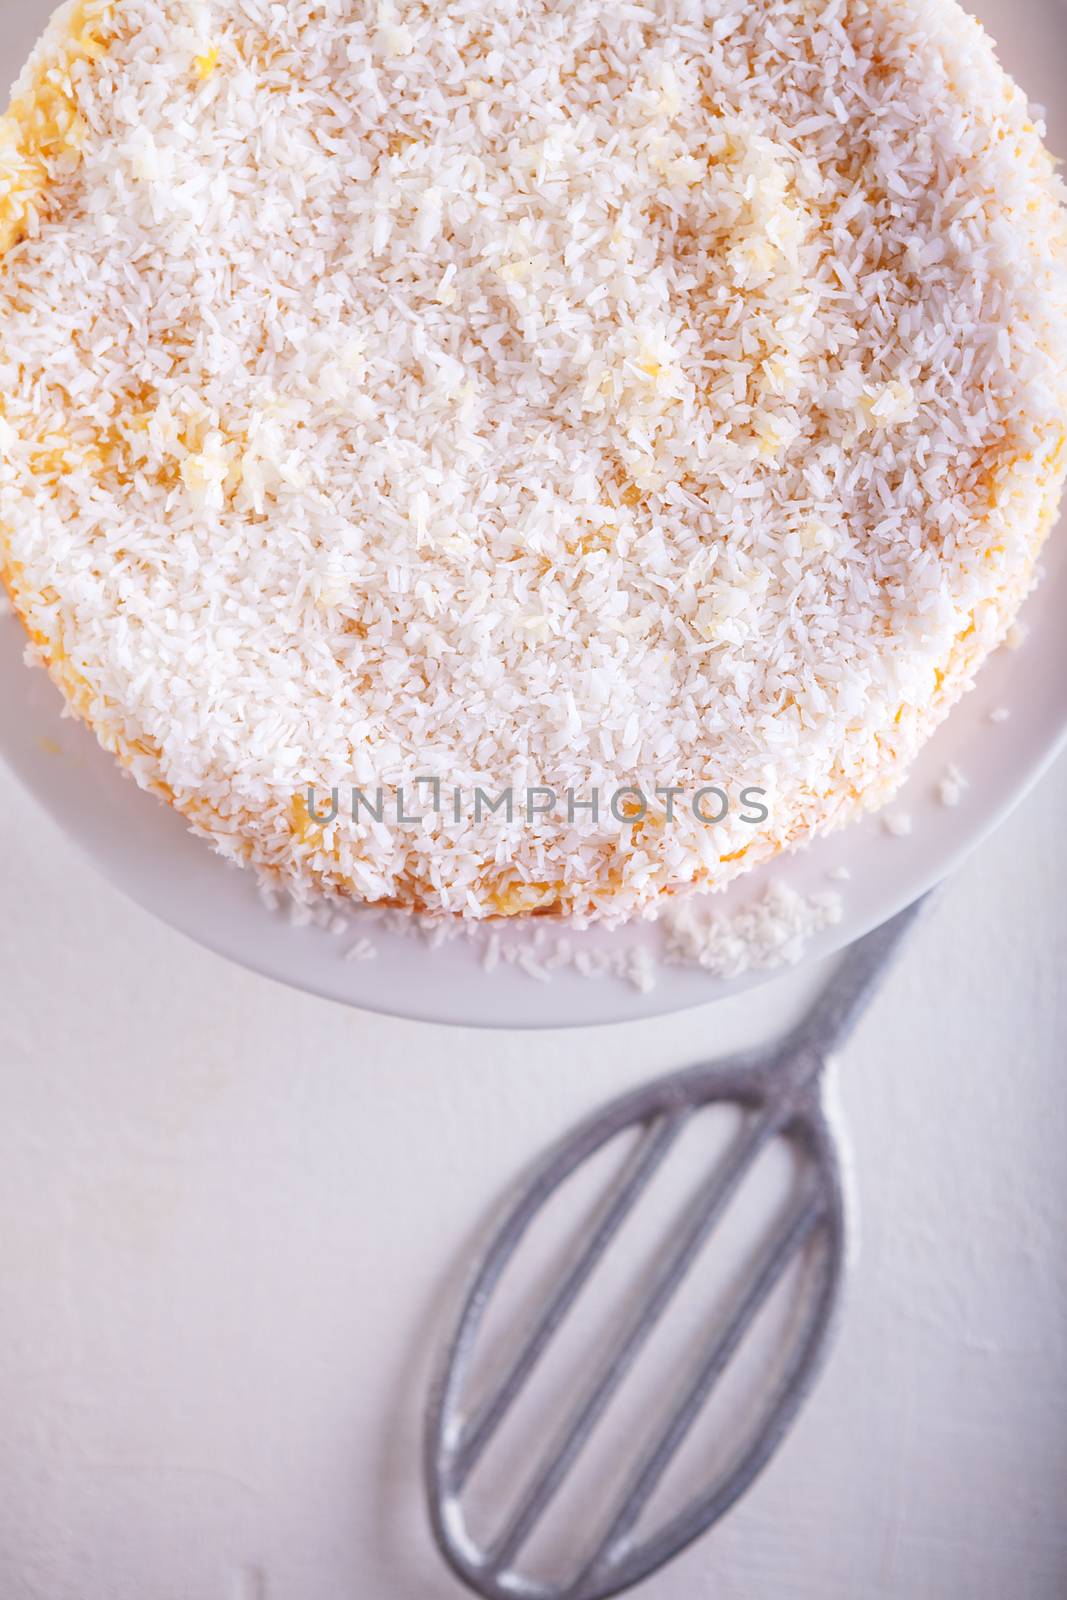 A piece of Homemade coconut cake on a white plate by supercat67